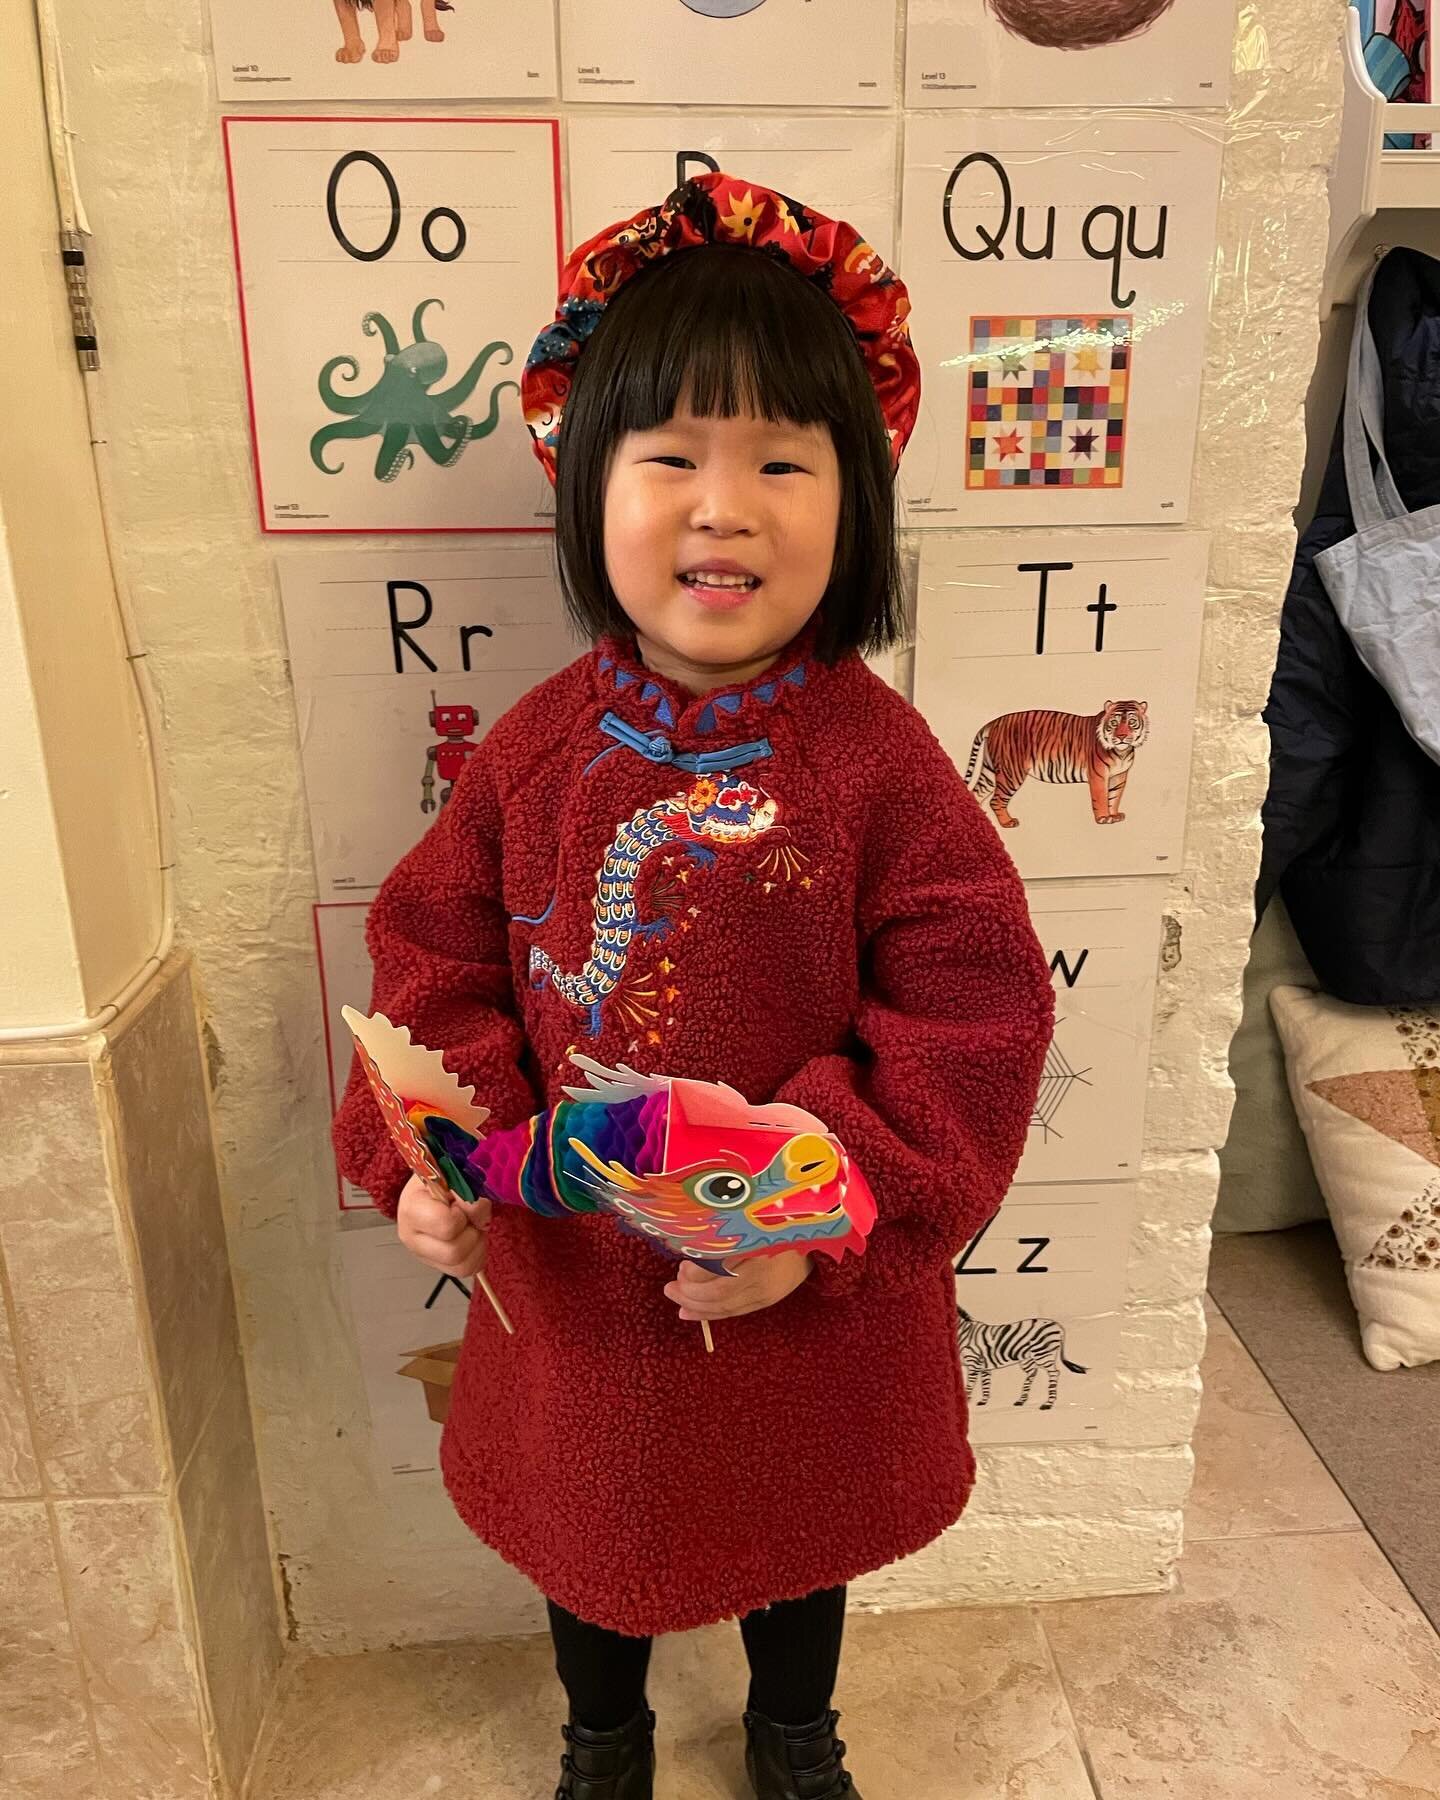 HAPPY LUNAR NEW YEAR to all our families who celebrate! May your year be filled with love, good health, and prosperity! 
🐉 🧧🏮🎊

#yearofthedragon #lunarnewyear #chinesenewyear #littlelearning #littlelearninginc #wherelearningfeelslikemagic #ues #n